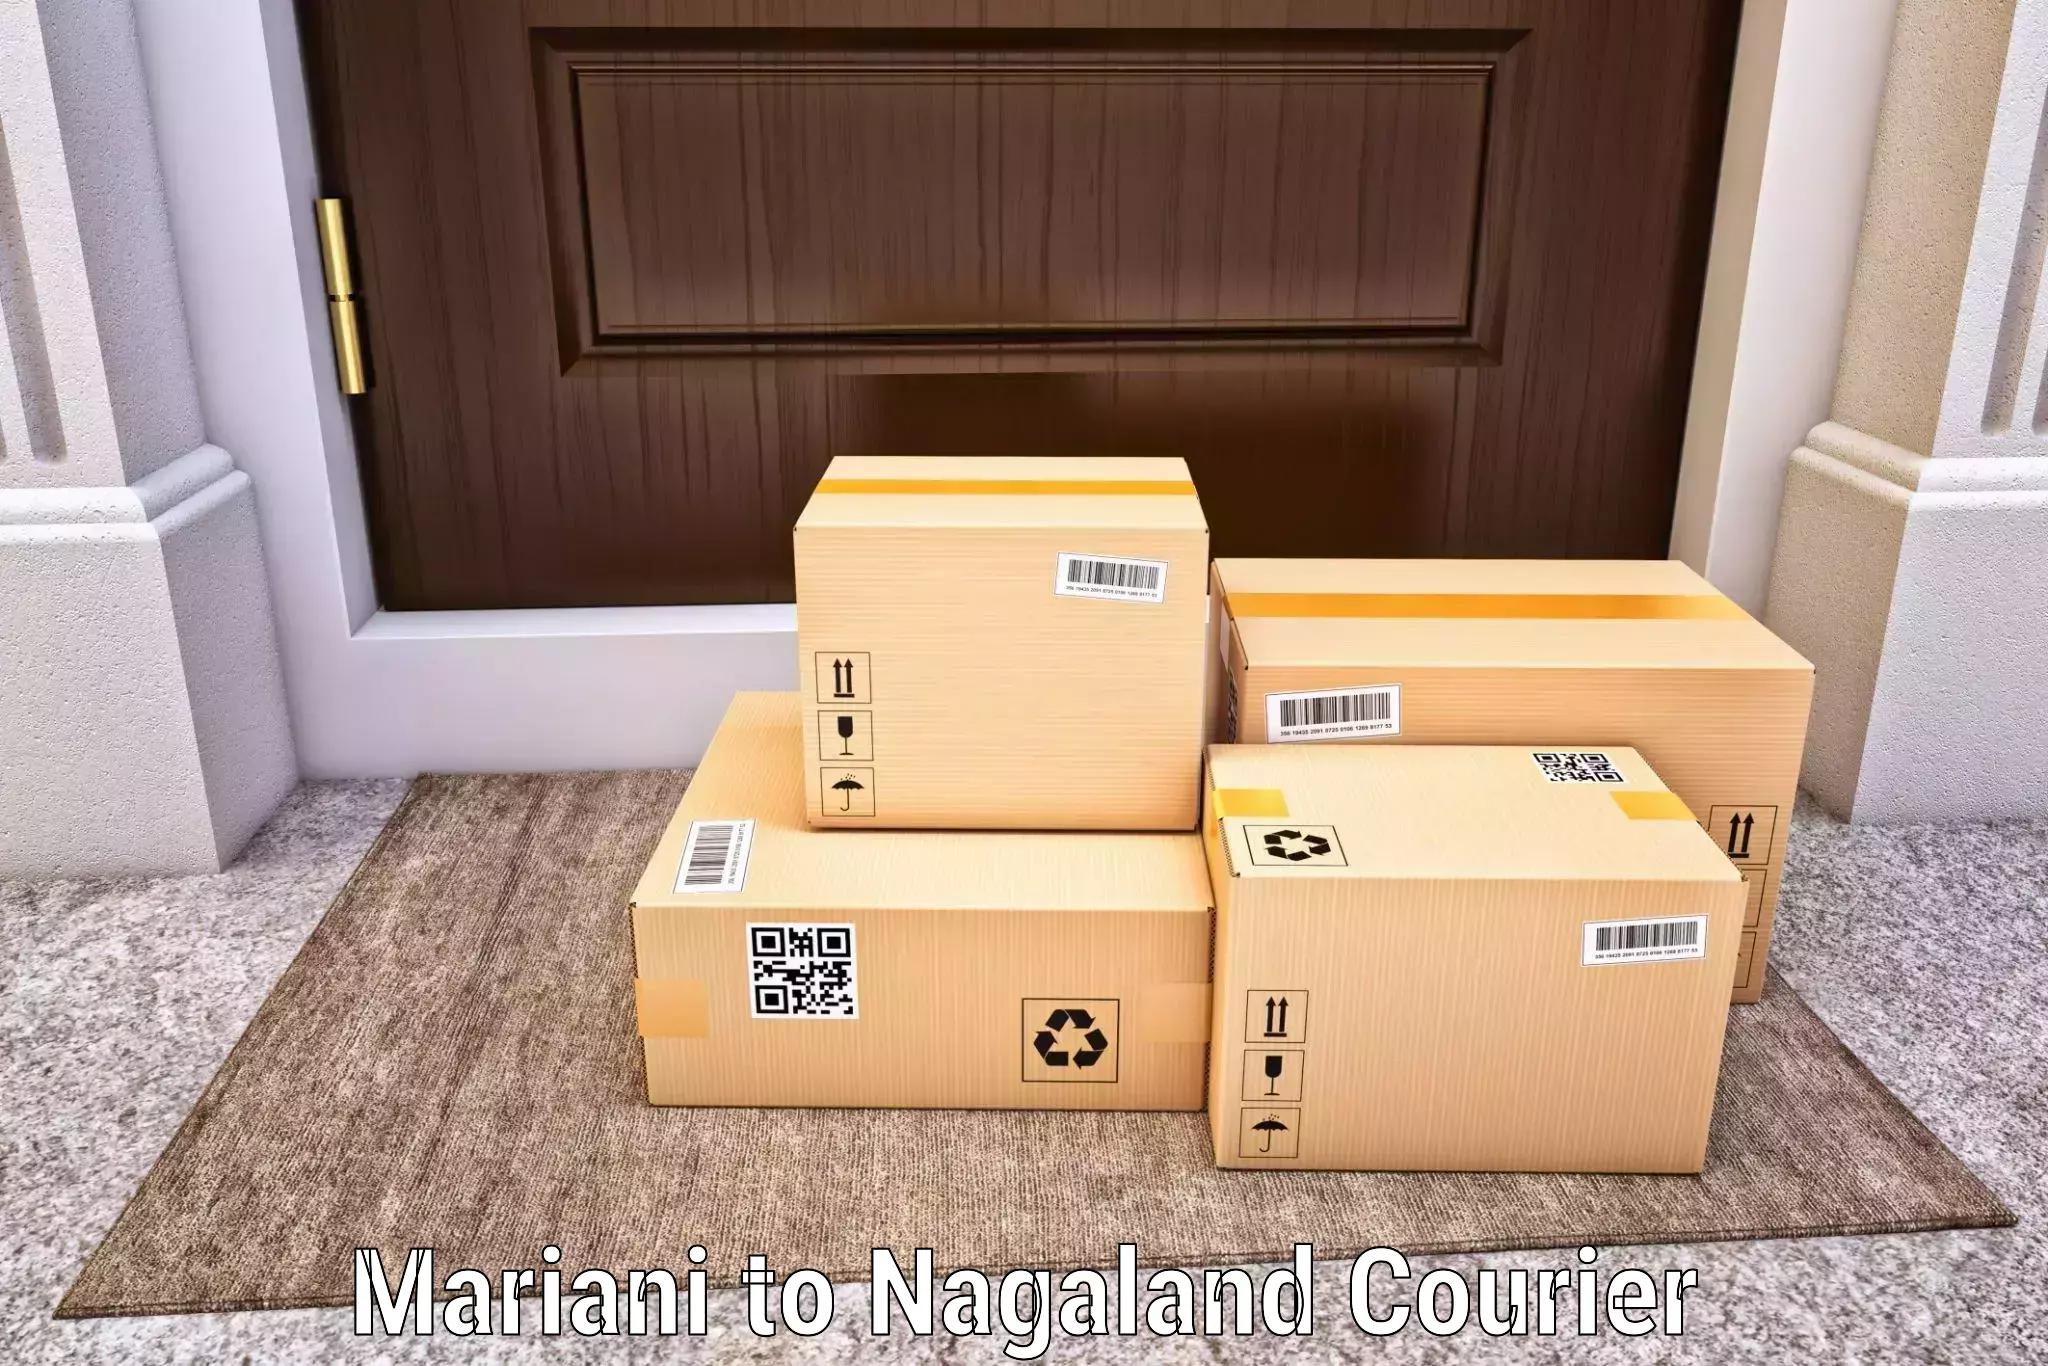 Courier service comparison in Mariani to Nagaland